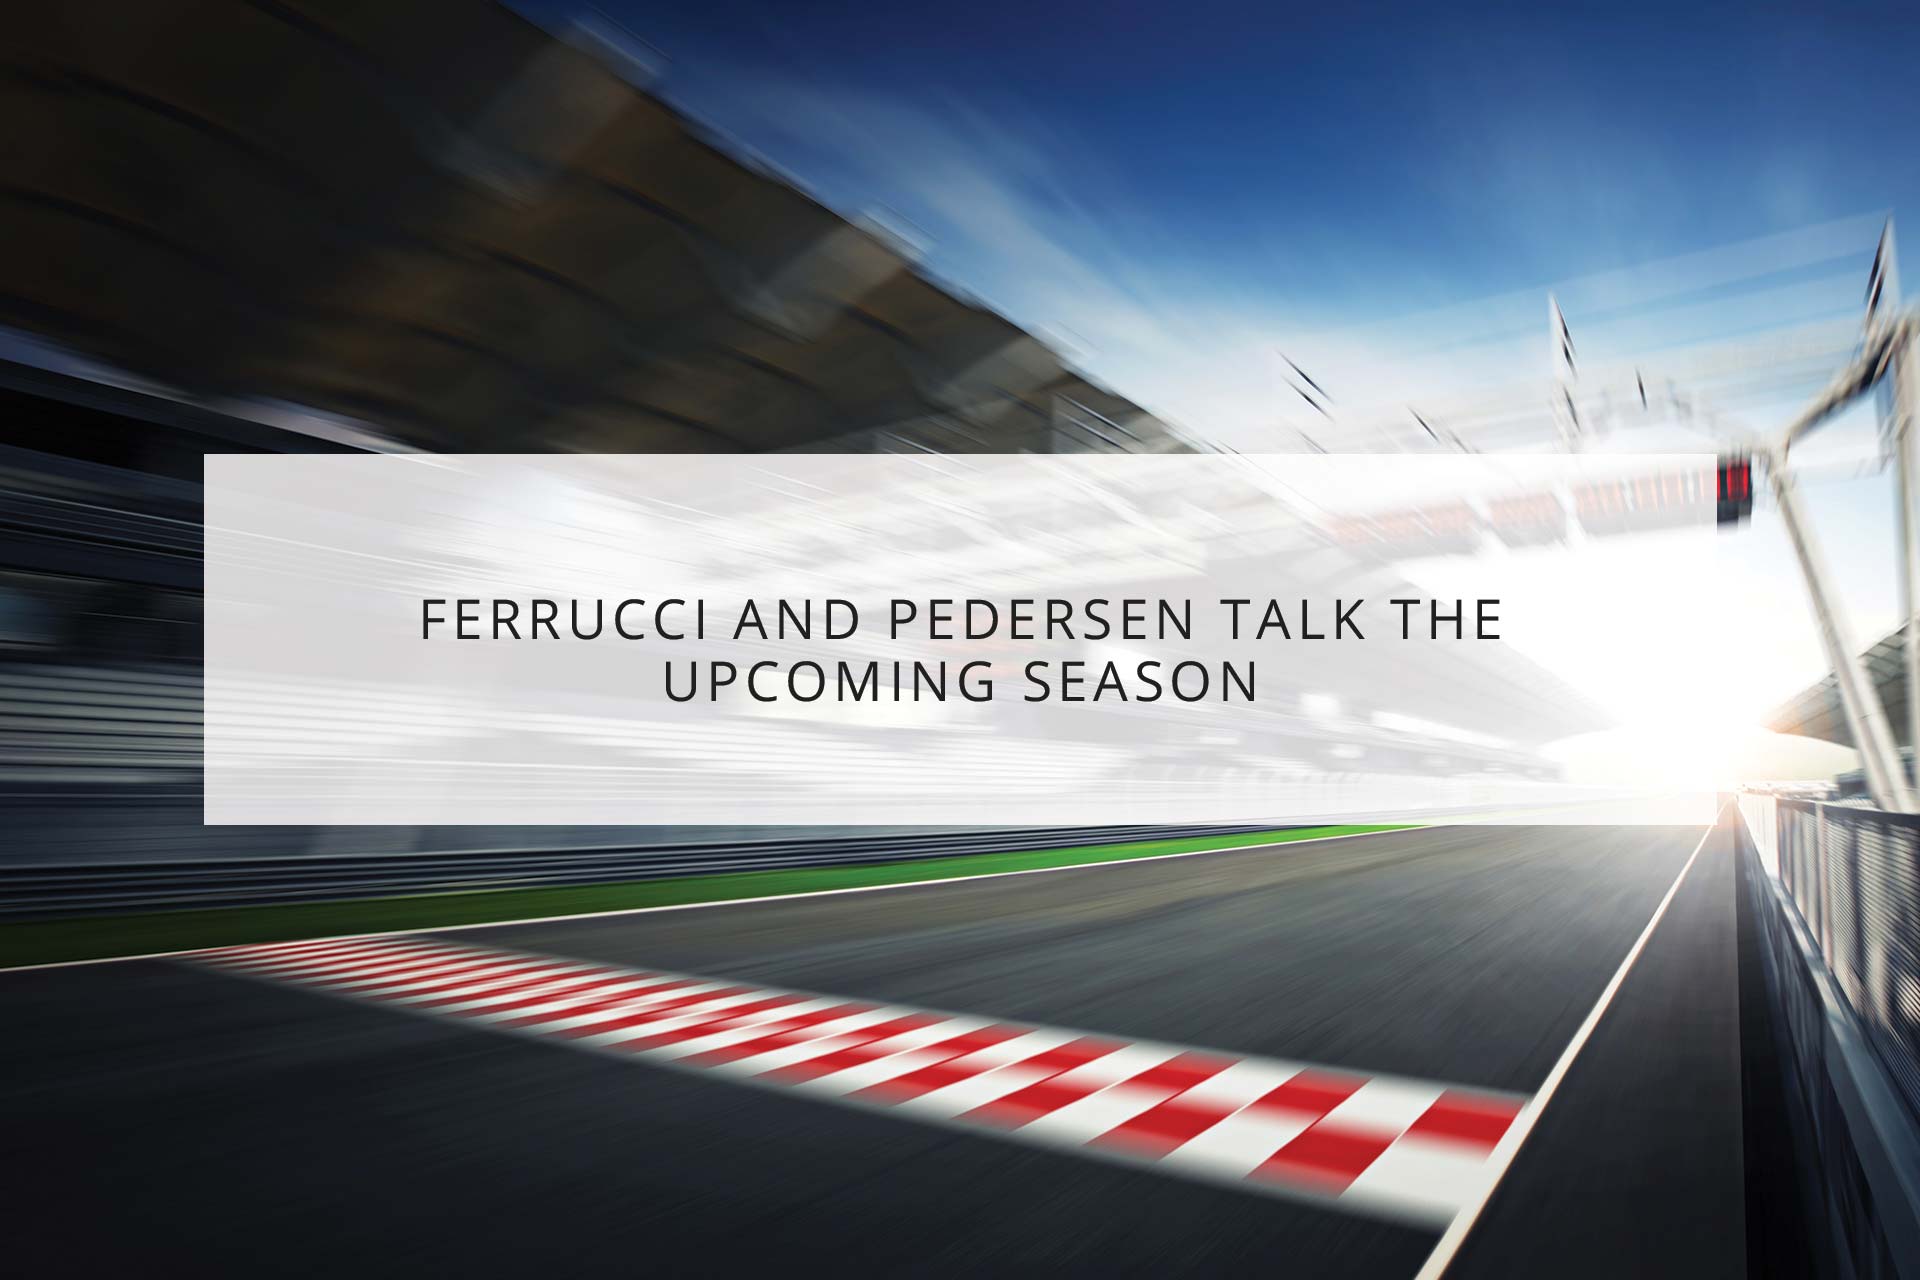 Can Foyt snap a decade long winless streak in 2023? Ferrucci and Pedersen talk the upcoming season